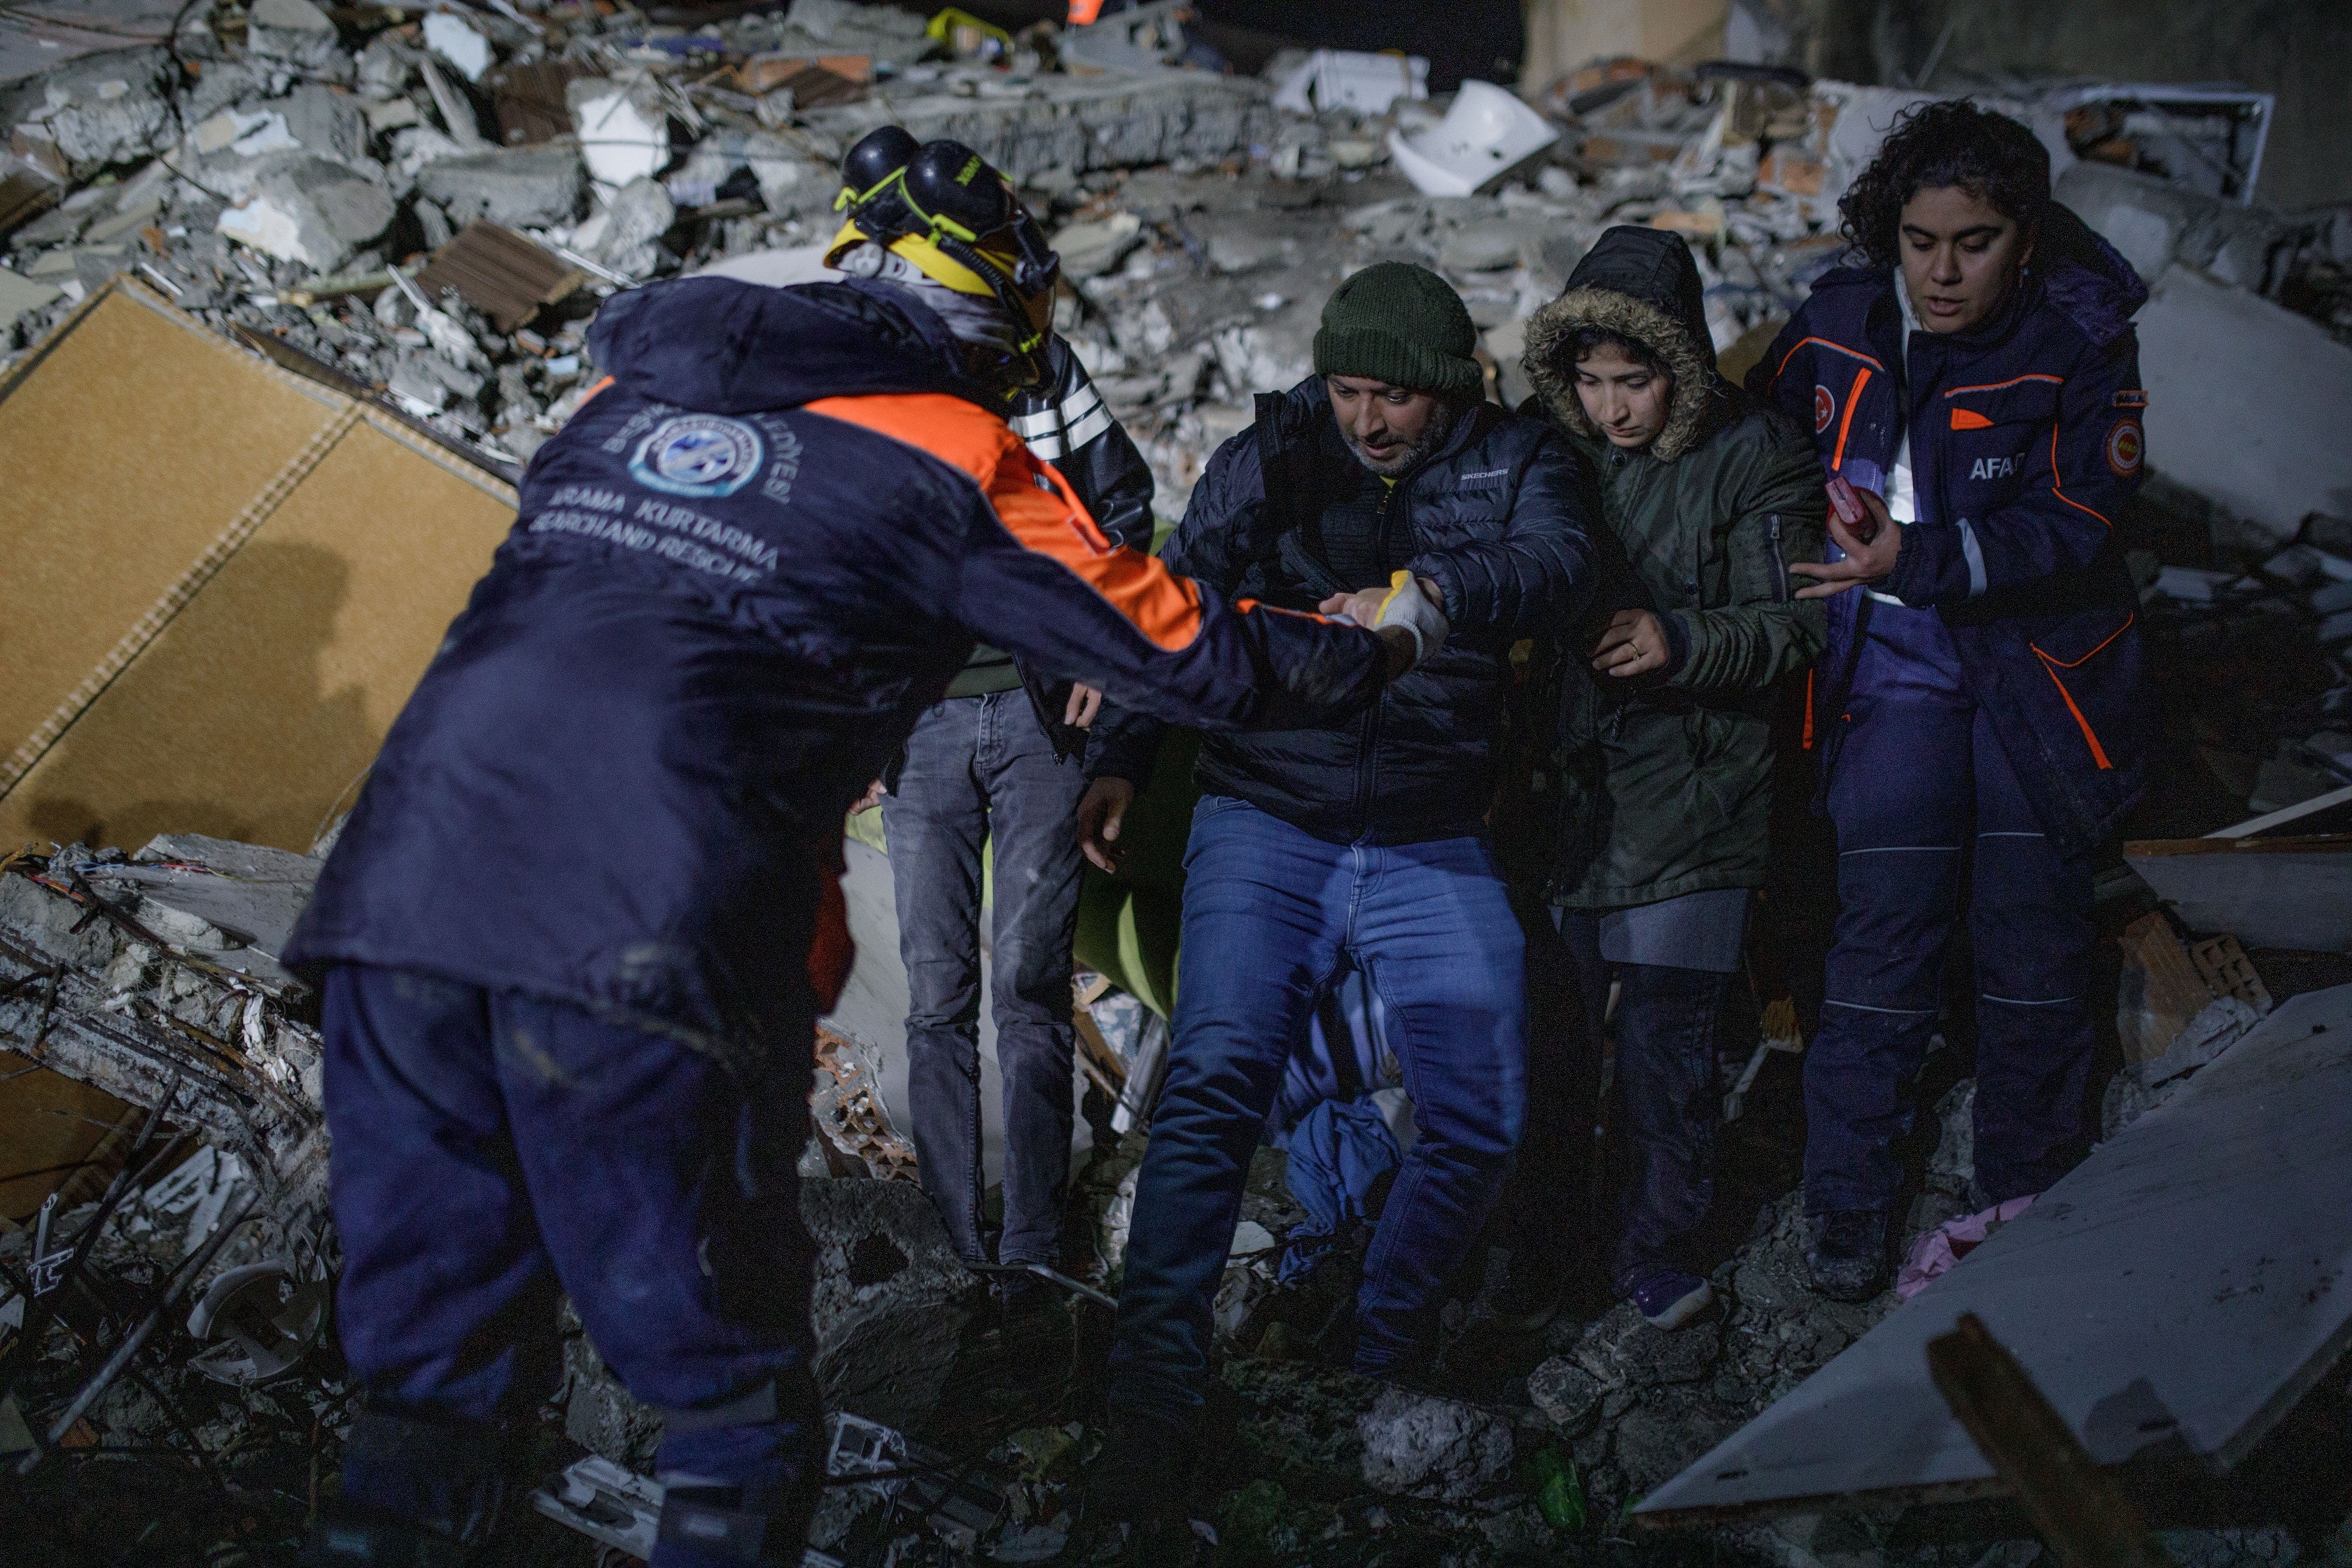 Rescuers scour the debris for survivors following the earthquake in Turkey